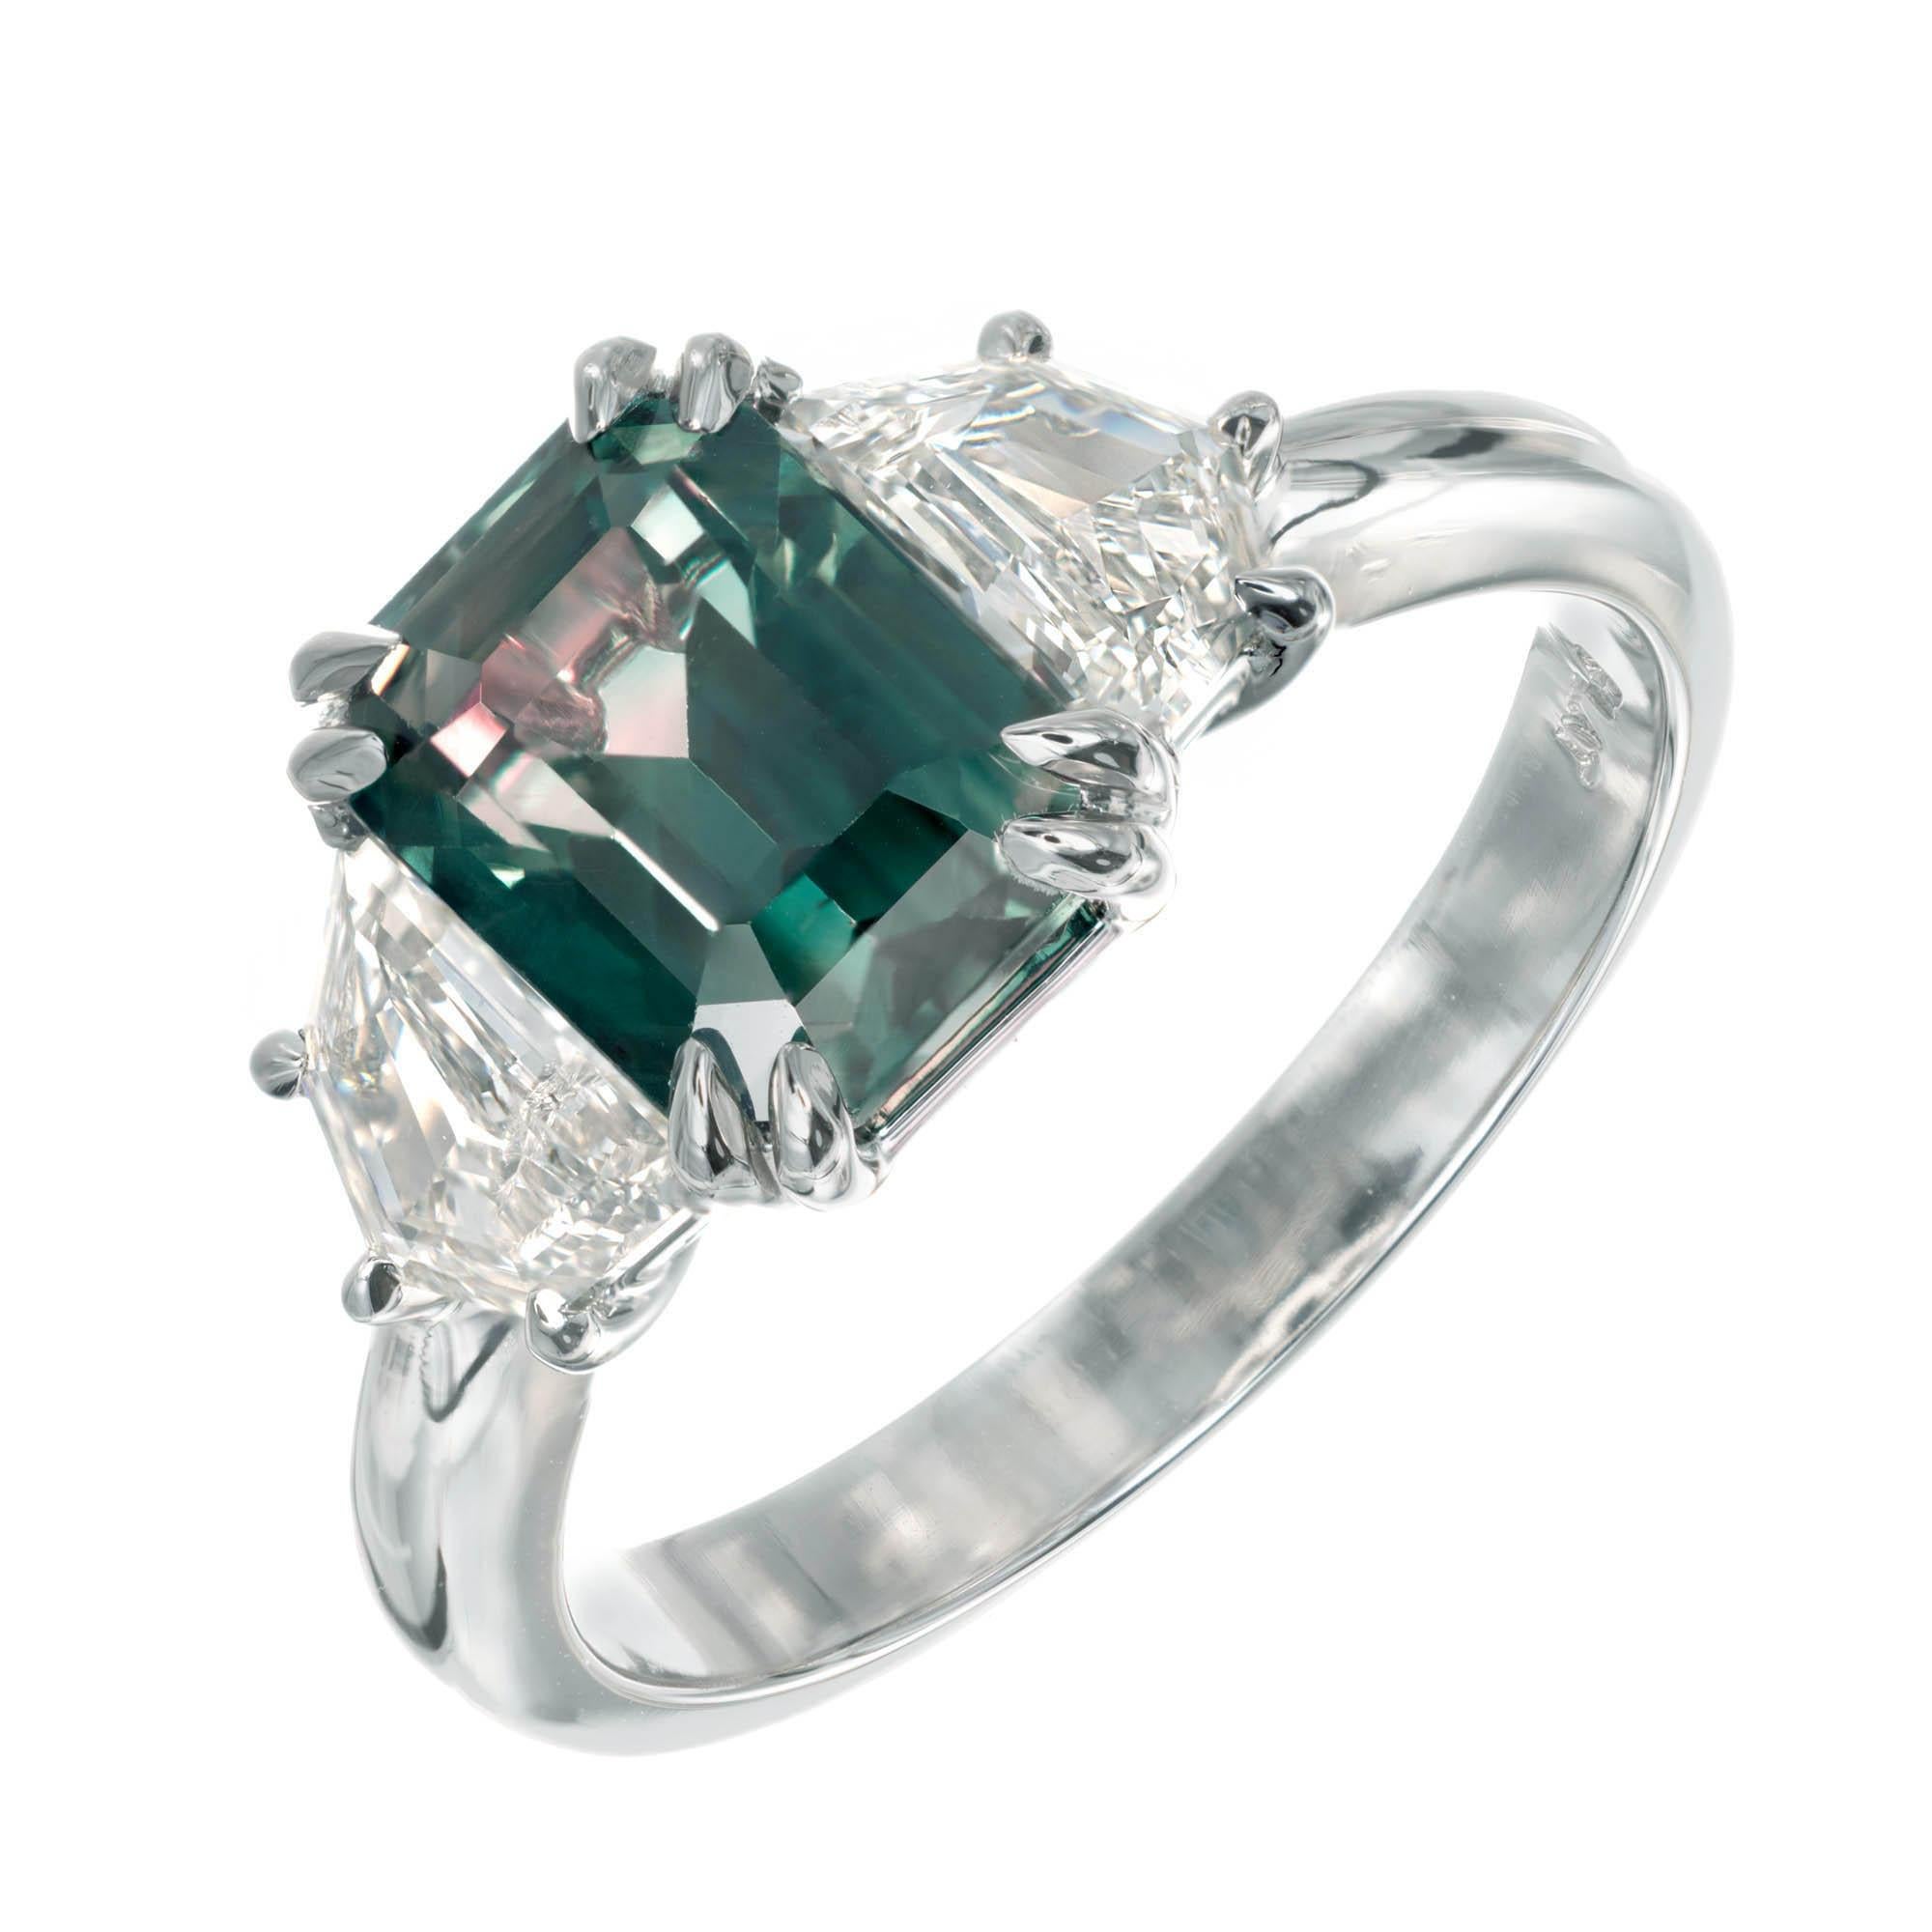 Peter Suchy natural teal (blue/green) octagonal cut sapphire and diamond three-stone engagement ring. The sapphire is from an 1920’s estate in a handmade platinum engagement ring with two Art Deco step cut shield shape diamonds. 

1 Octagonal cut